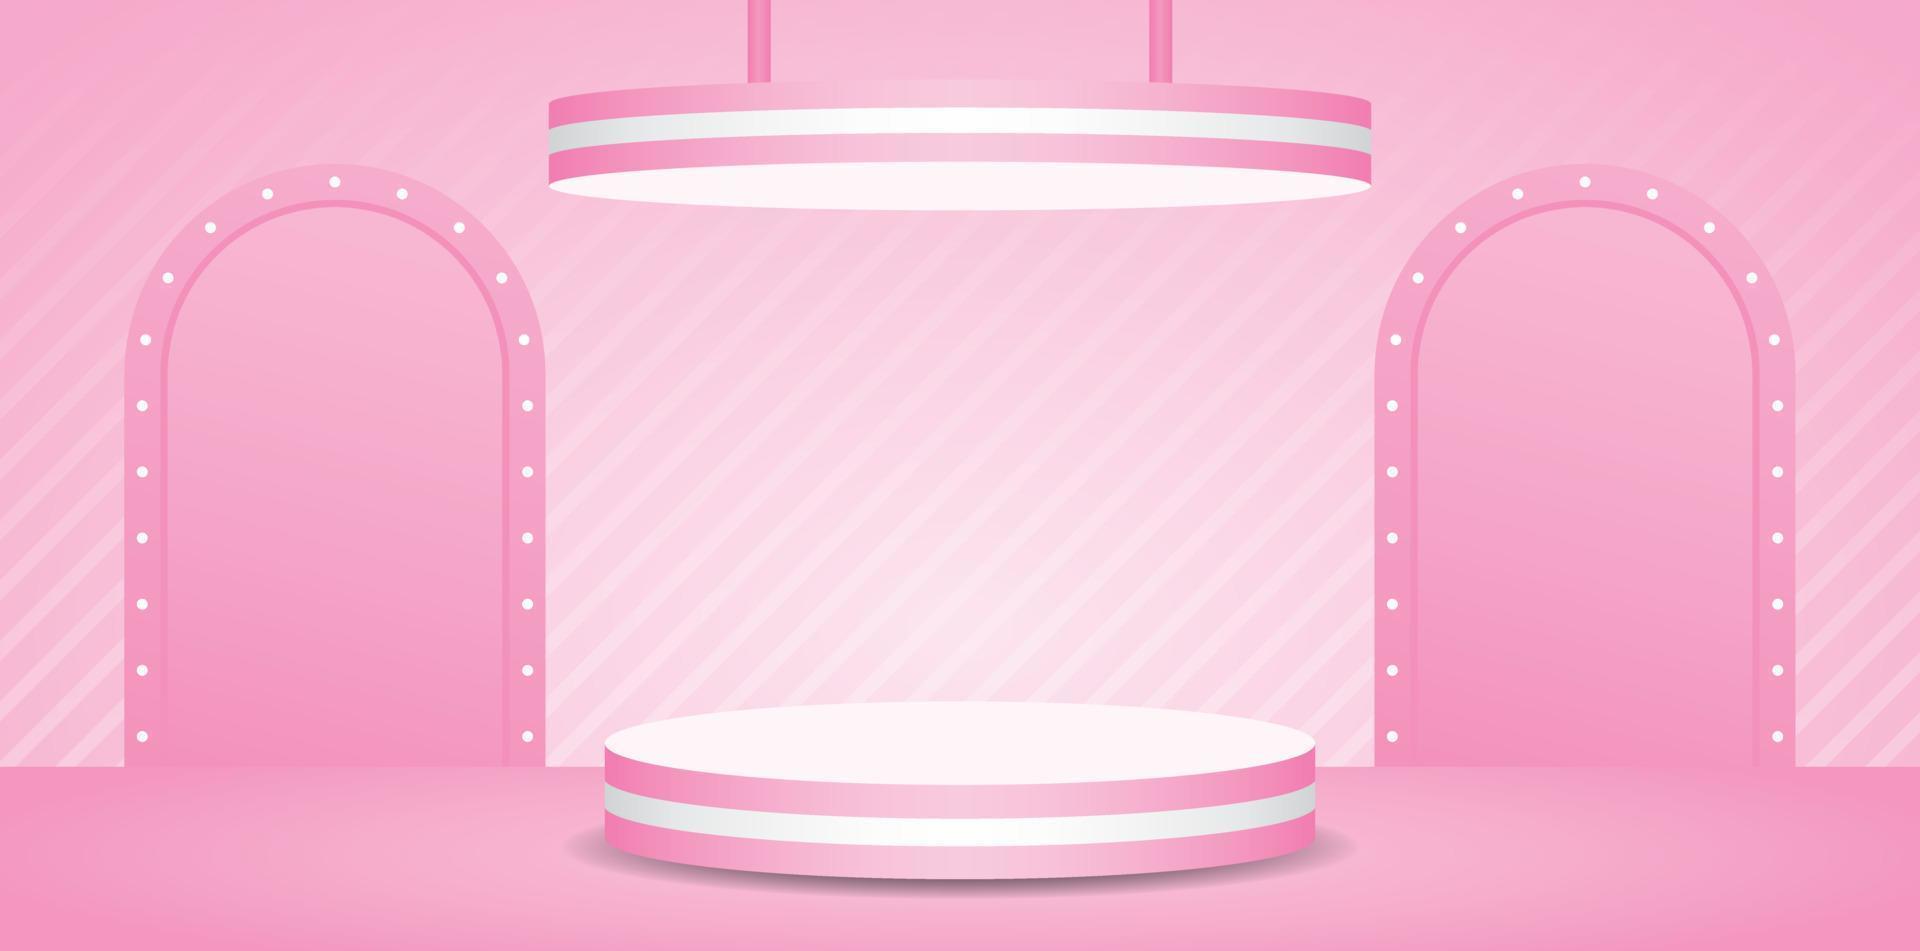 pink striped podium display stage with hanging ceiling and lightbulb arch backdrop on sweet pastel pink floor and wall 3d illustration vector for putting beauty and cosmetic product